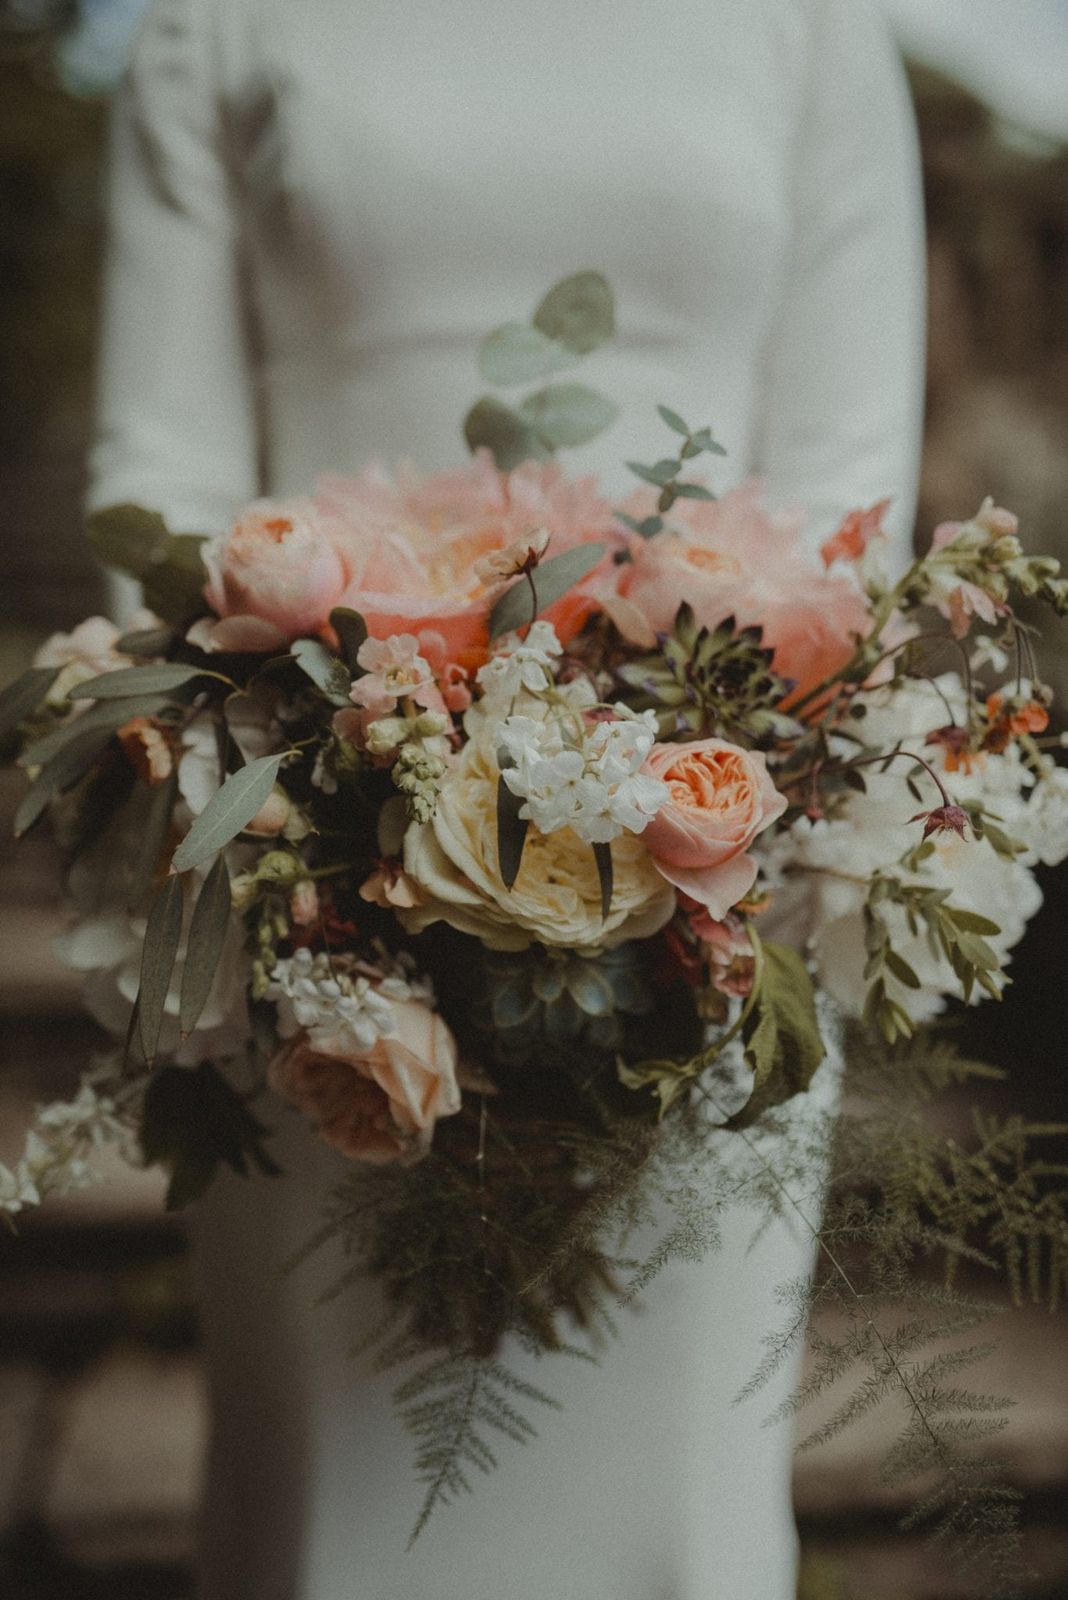 Be inspired by this couple's rustic Hestercombe real wedding, with an Orangery ceremony, rustic barn style reception and English garden flowers...